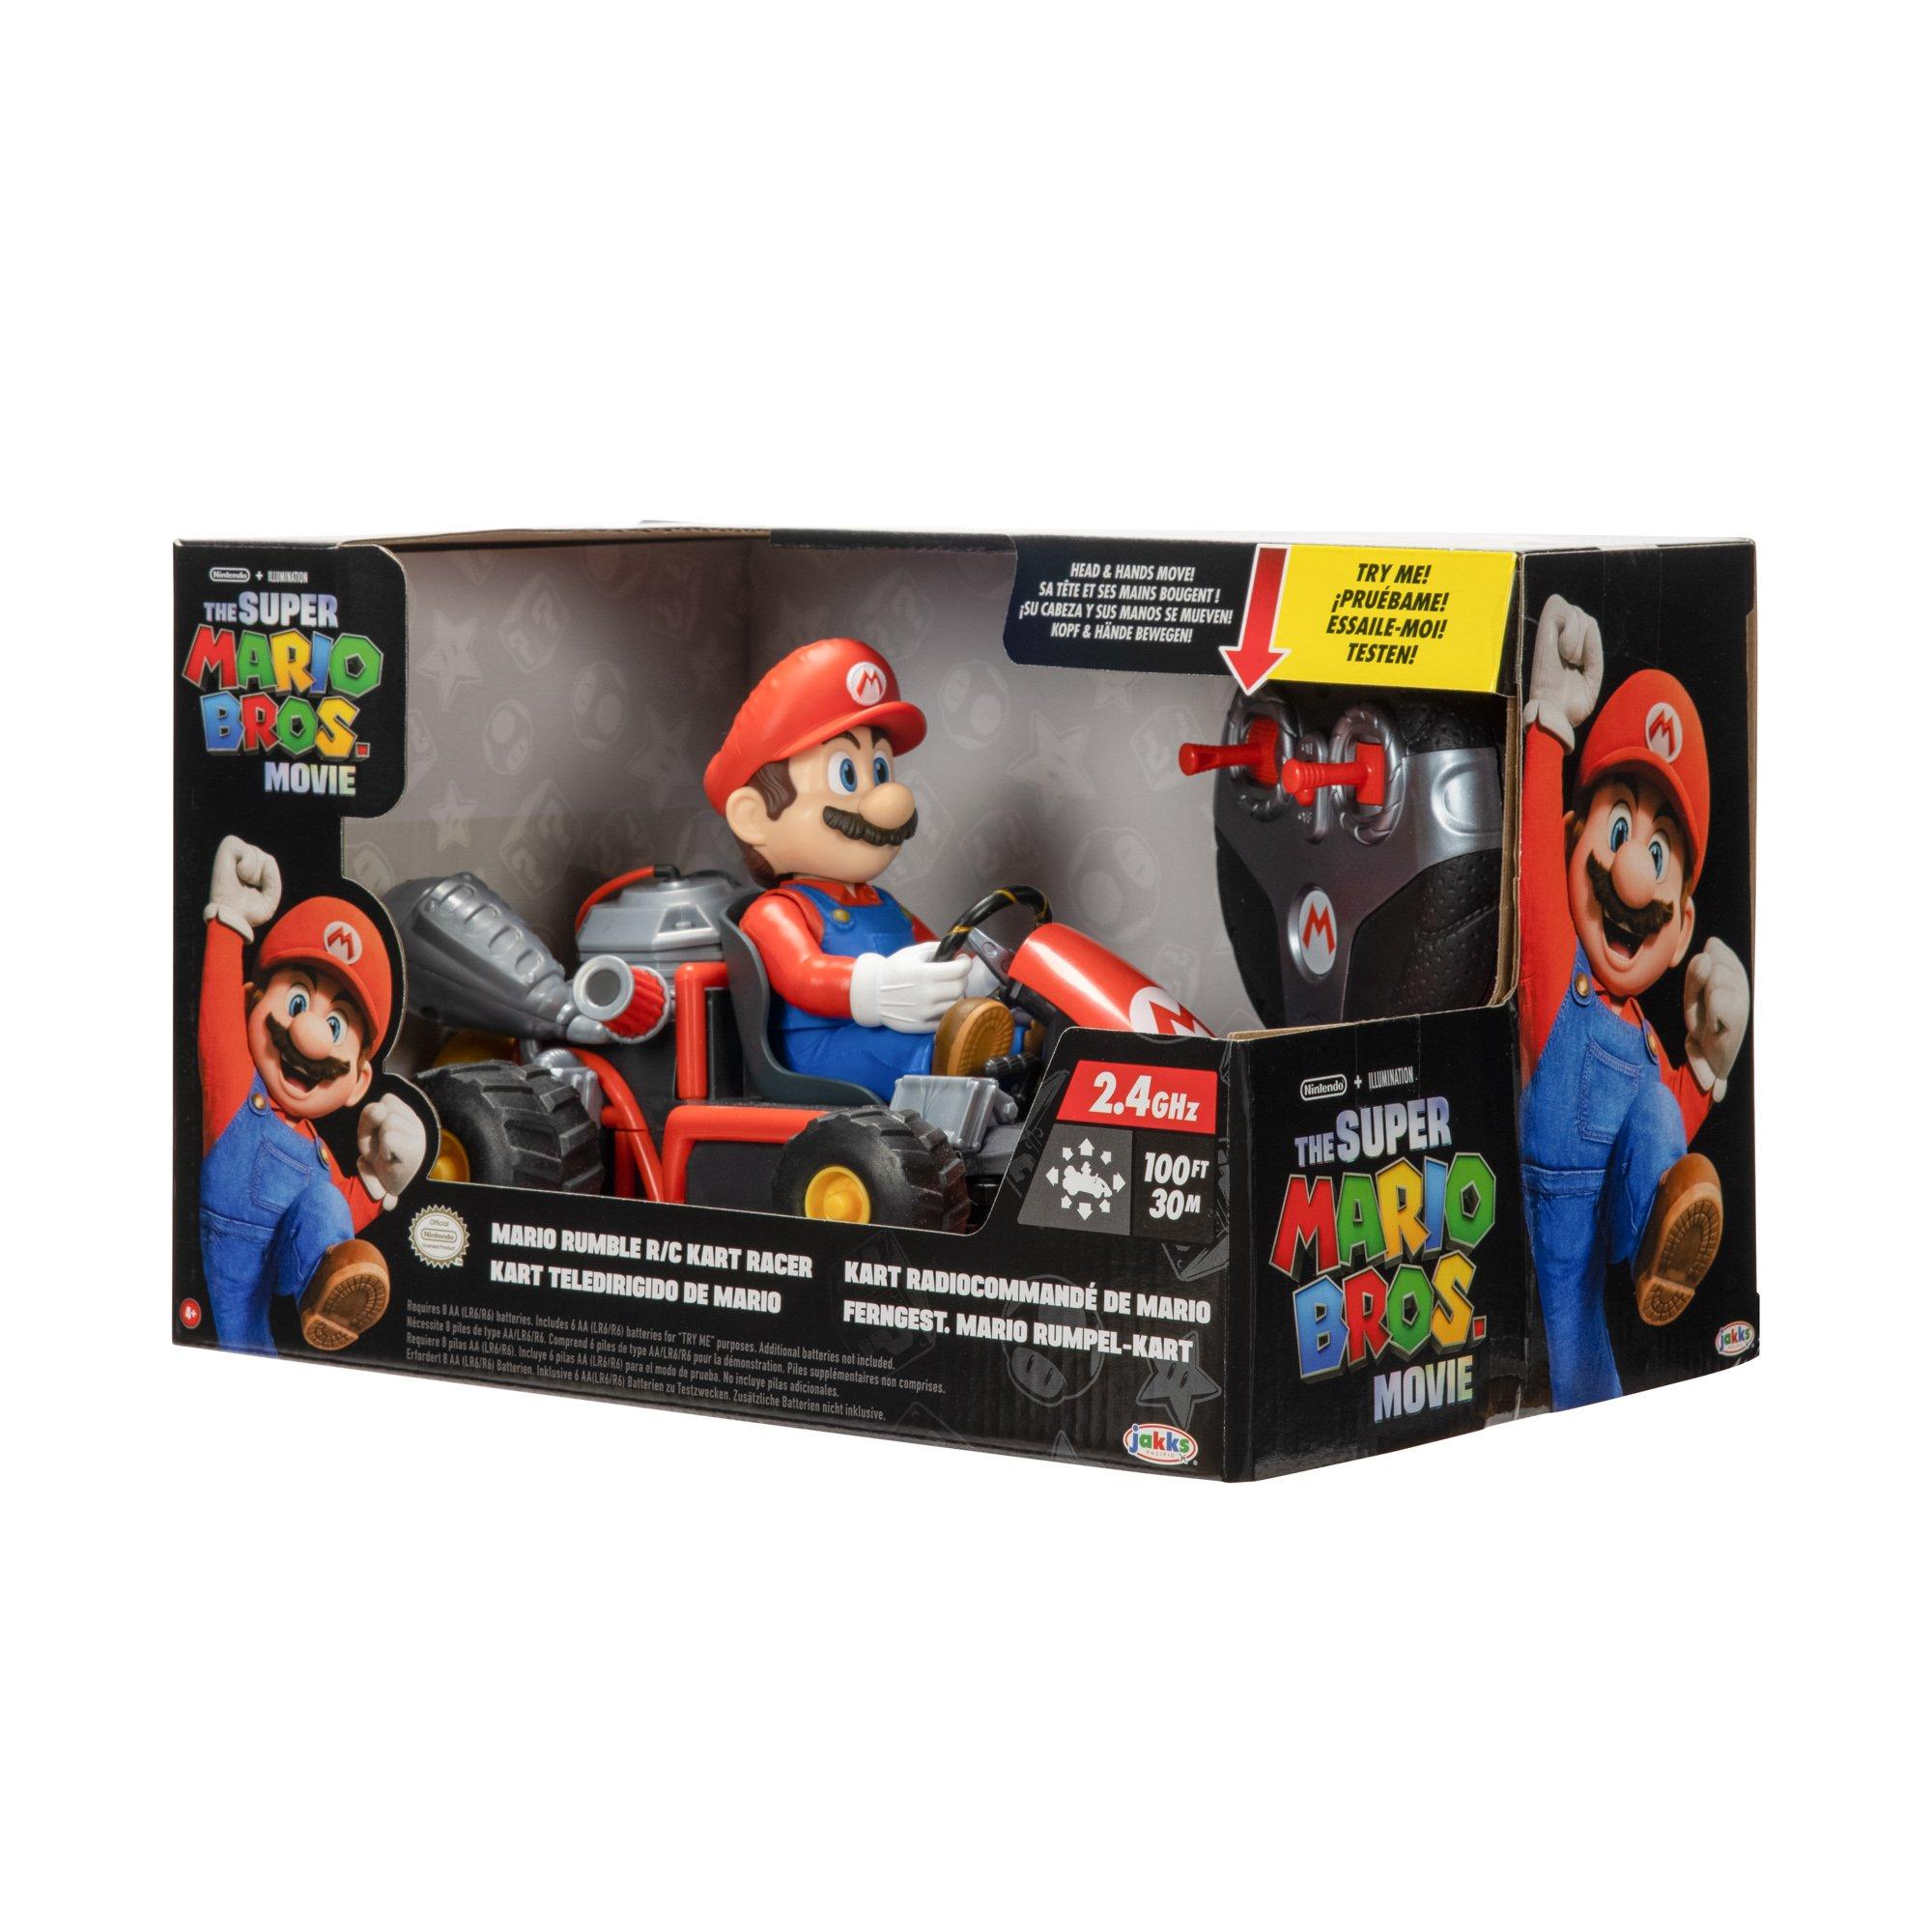 GameStop/US] Select Mario Games - $39.99 (33% off) each + Free Super Mario  Bros movie ticket for Pro Members (All Mario games are eligible) :  r/NintendoSwitchDeals